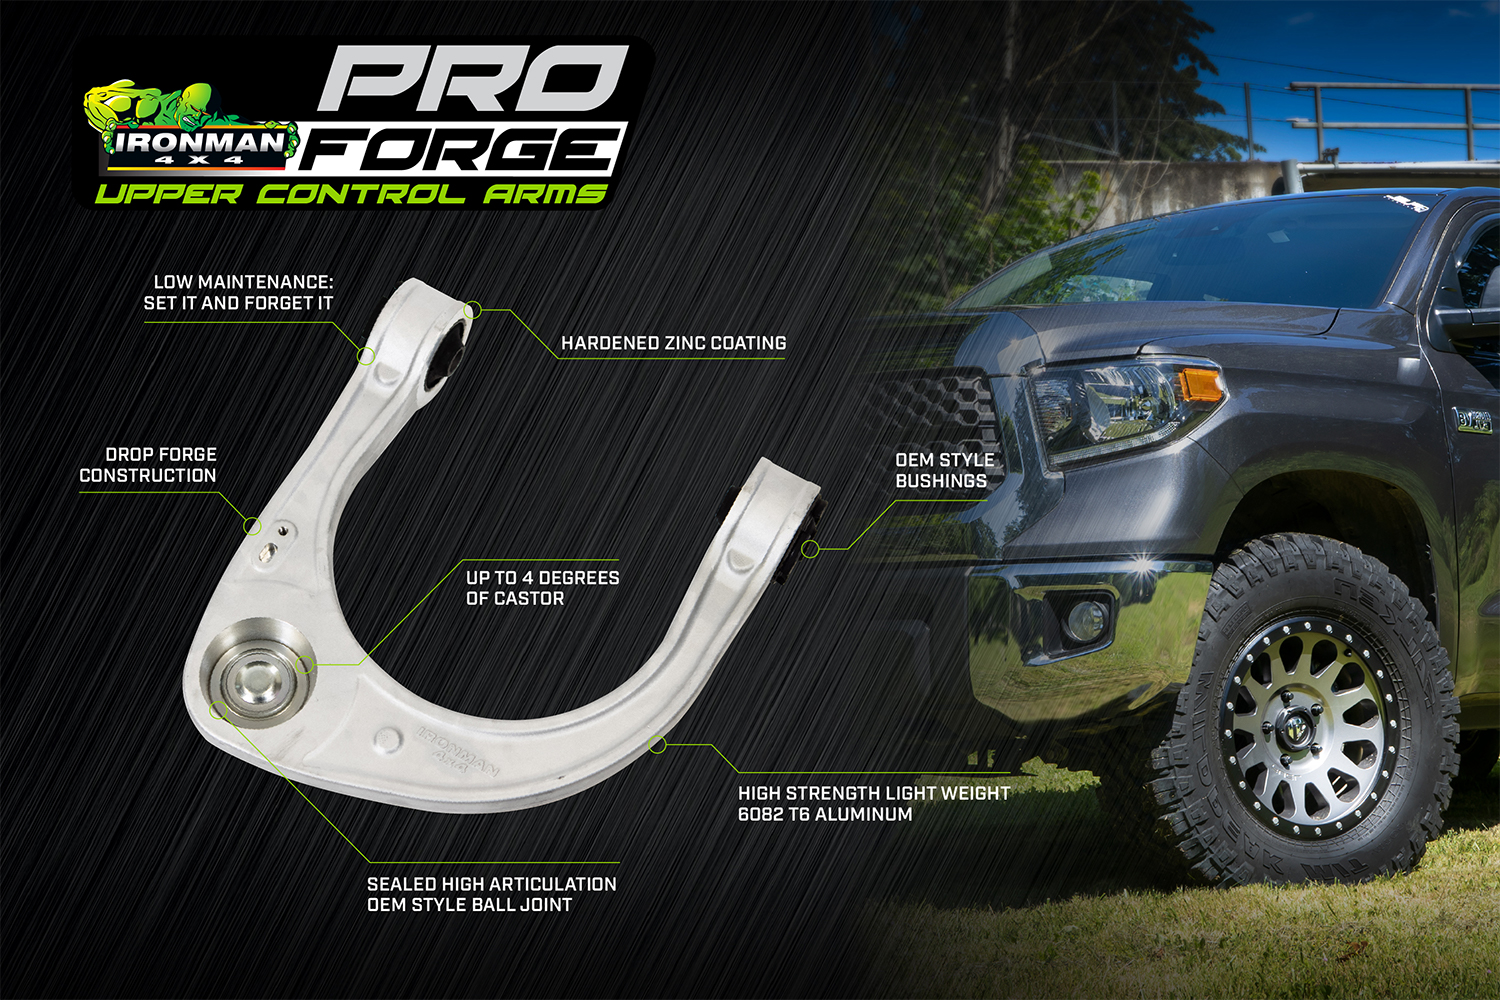 Pro Forge Upper Control Arms Suited For 2007-2021 Toyota Tundra Questions & Answers